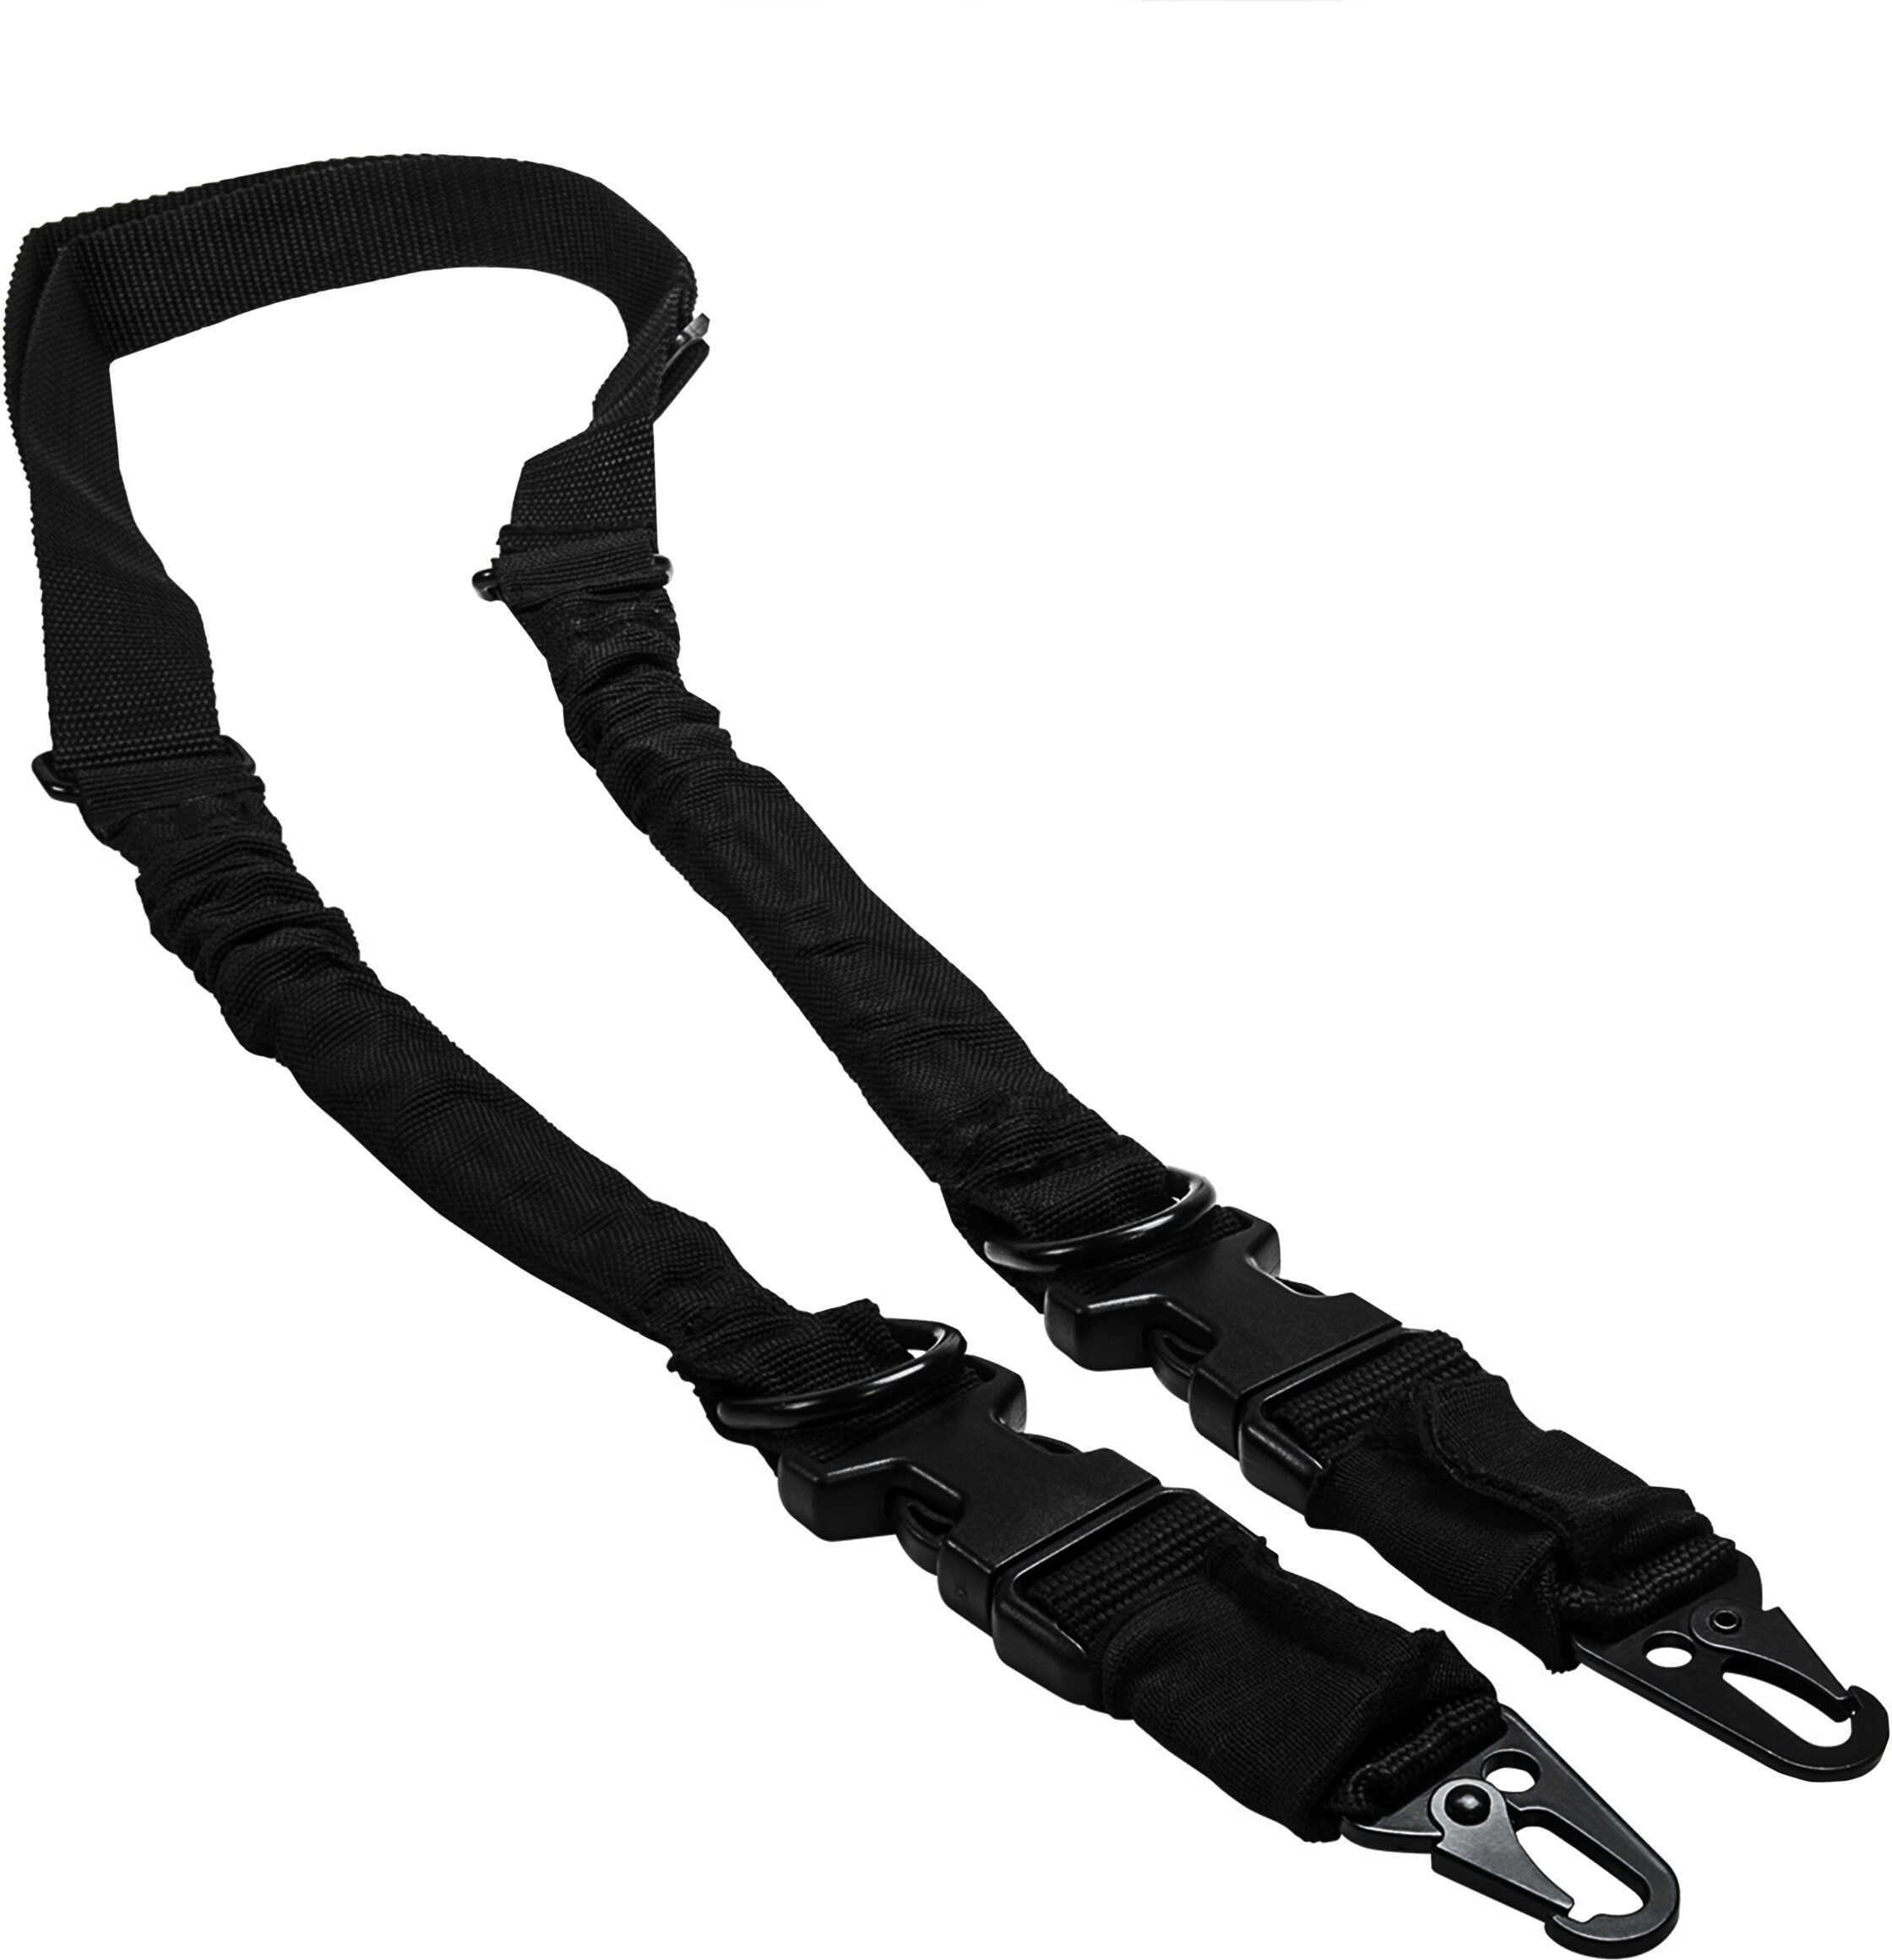 NcStar 2 Point to Single Sling Black Md: AARS21PB